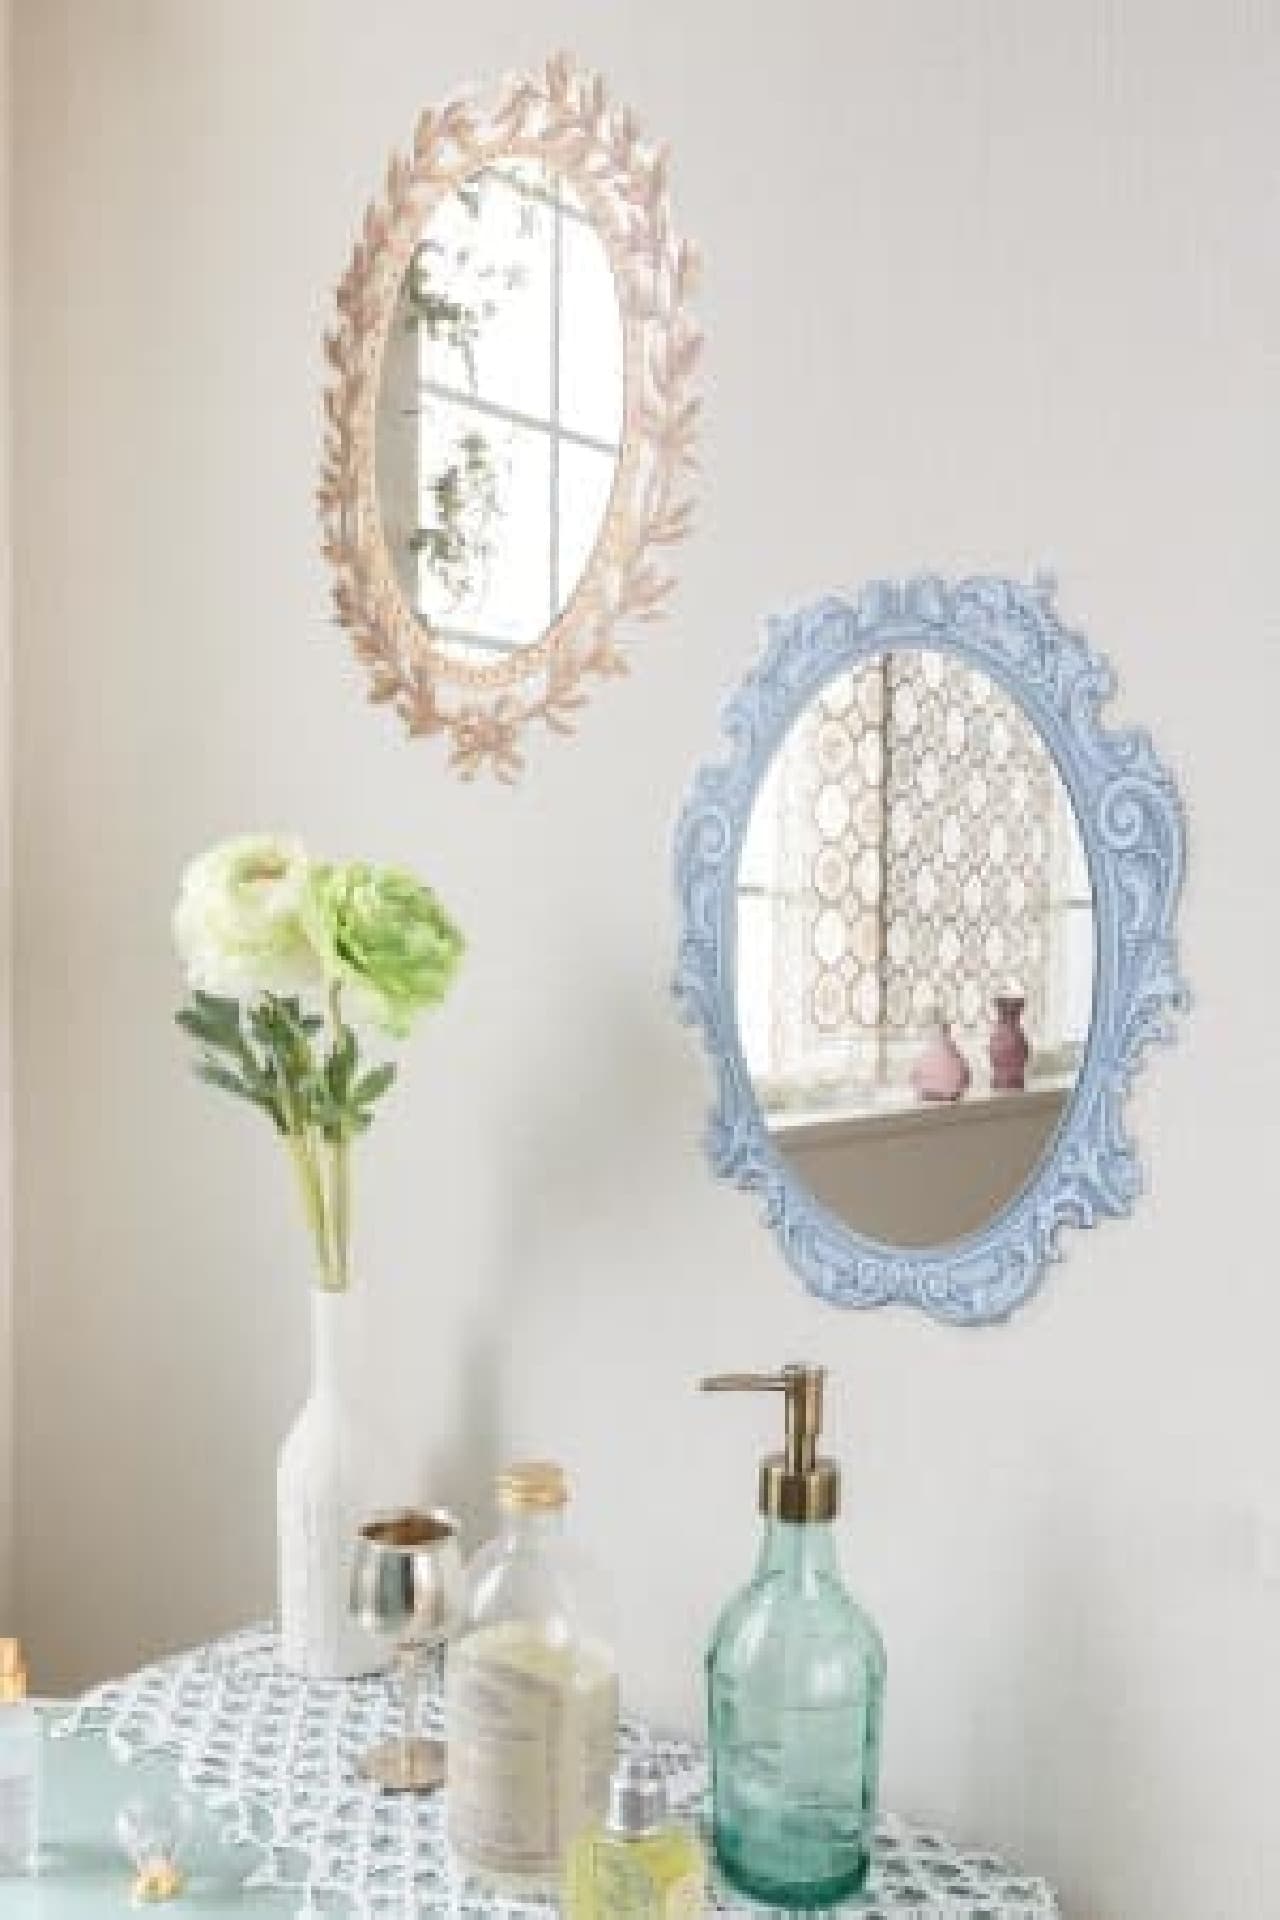 Mirrors can be placed anywhere you want without making holes in the wall.